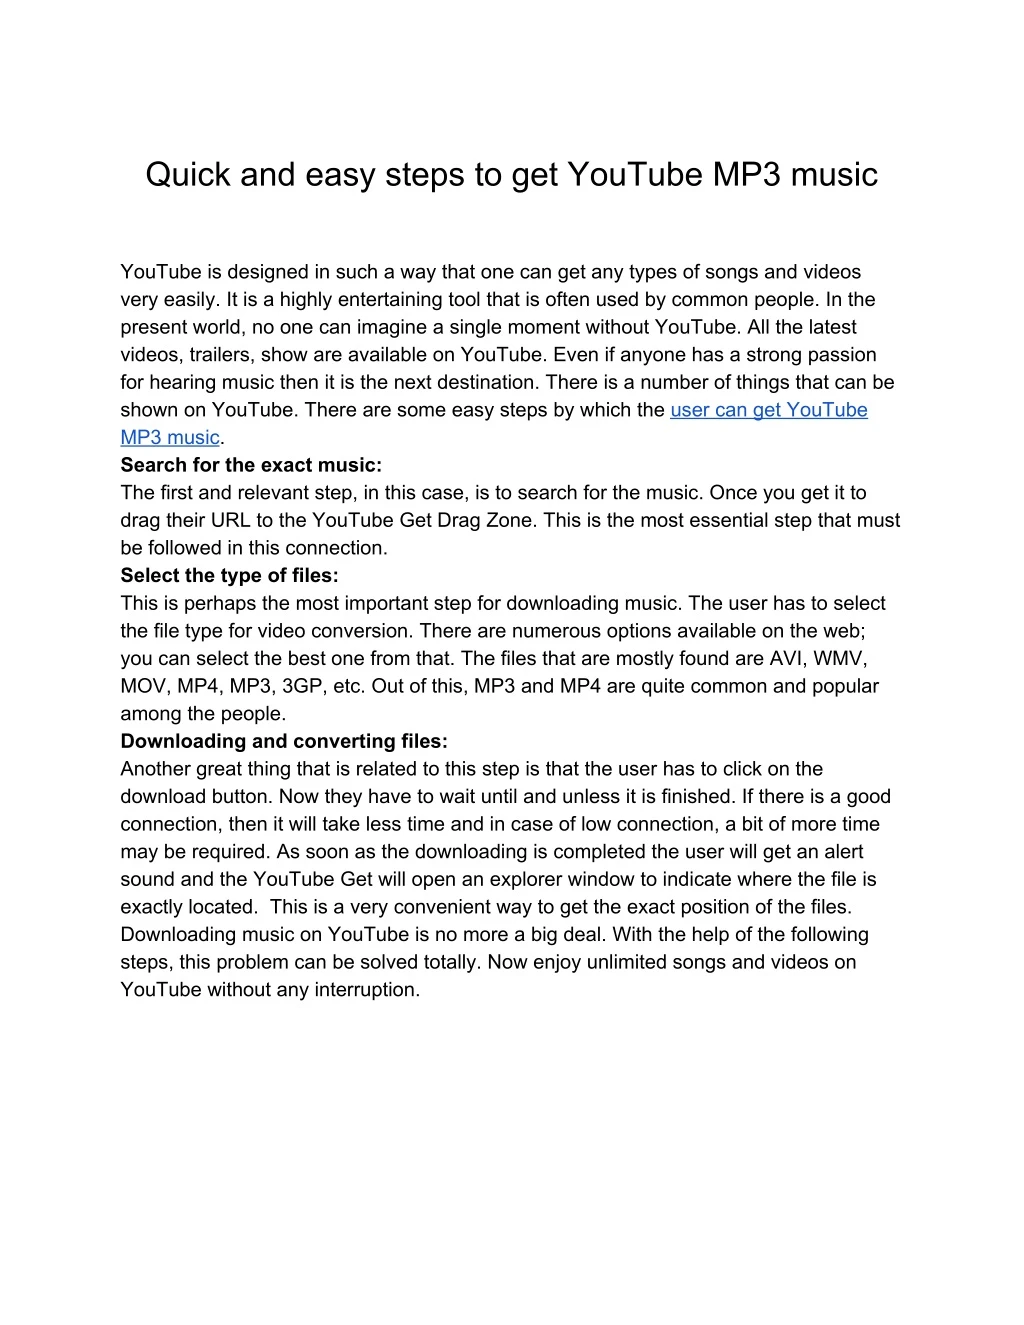 quick and easy steps to get youtube mp3 music